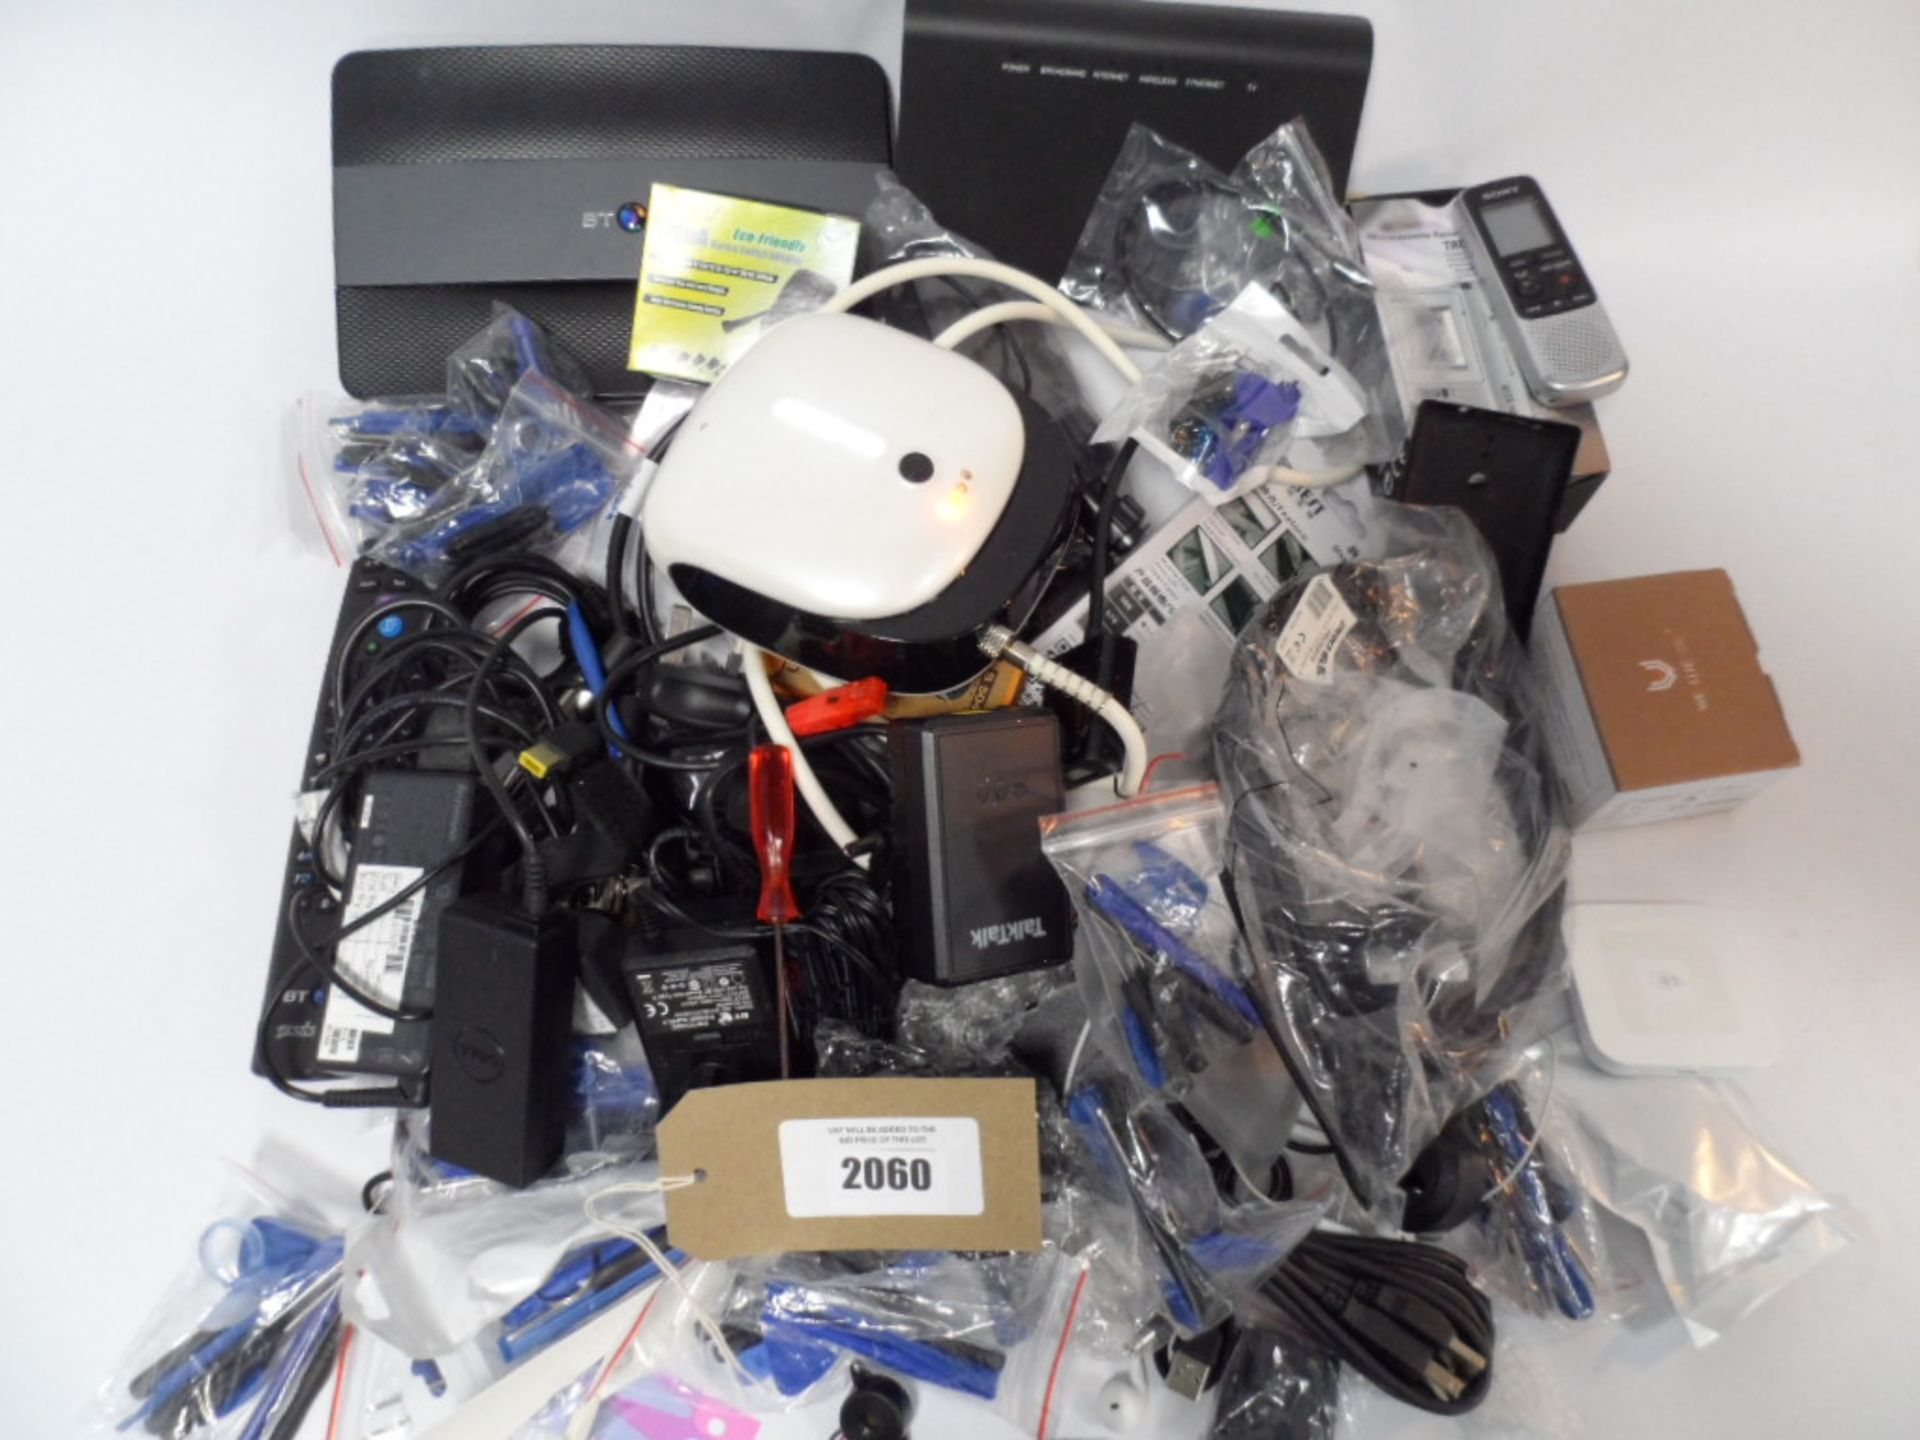 Bag containing various electrical sundries, mobile phone screen removal kits, Sanyo dictation